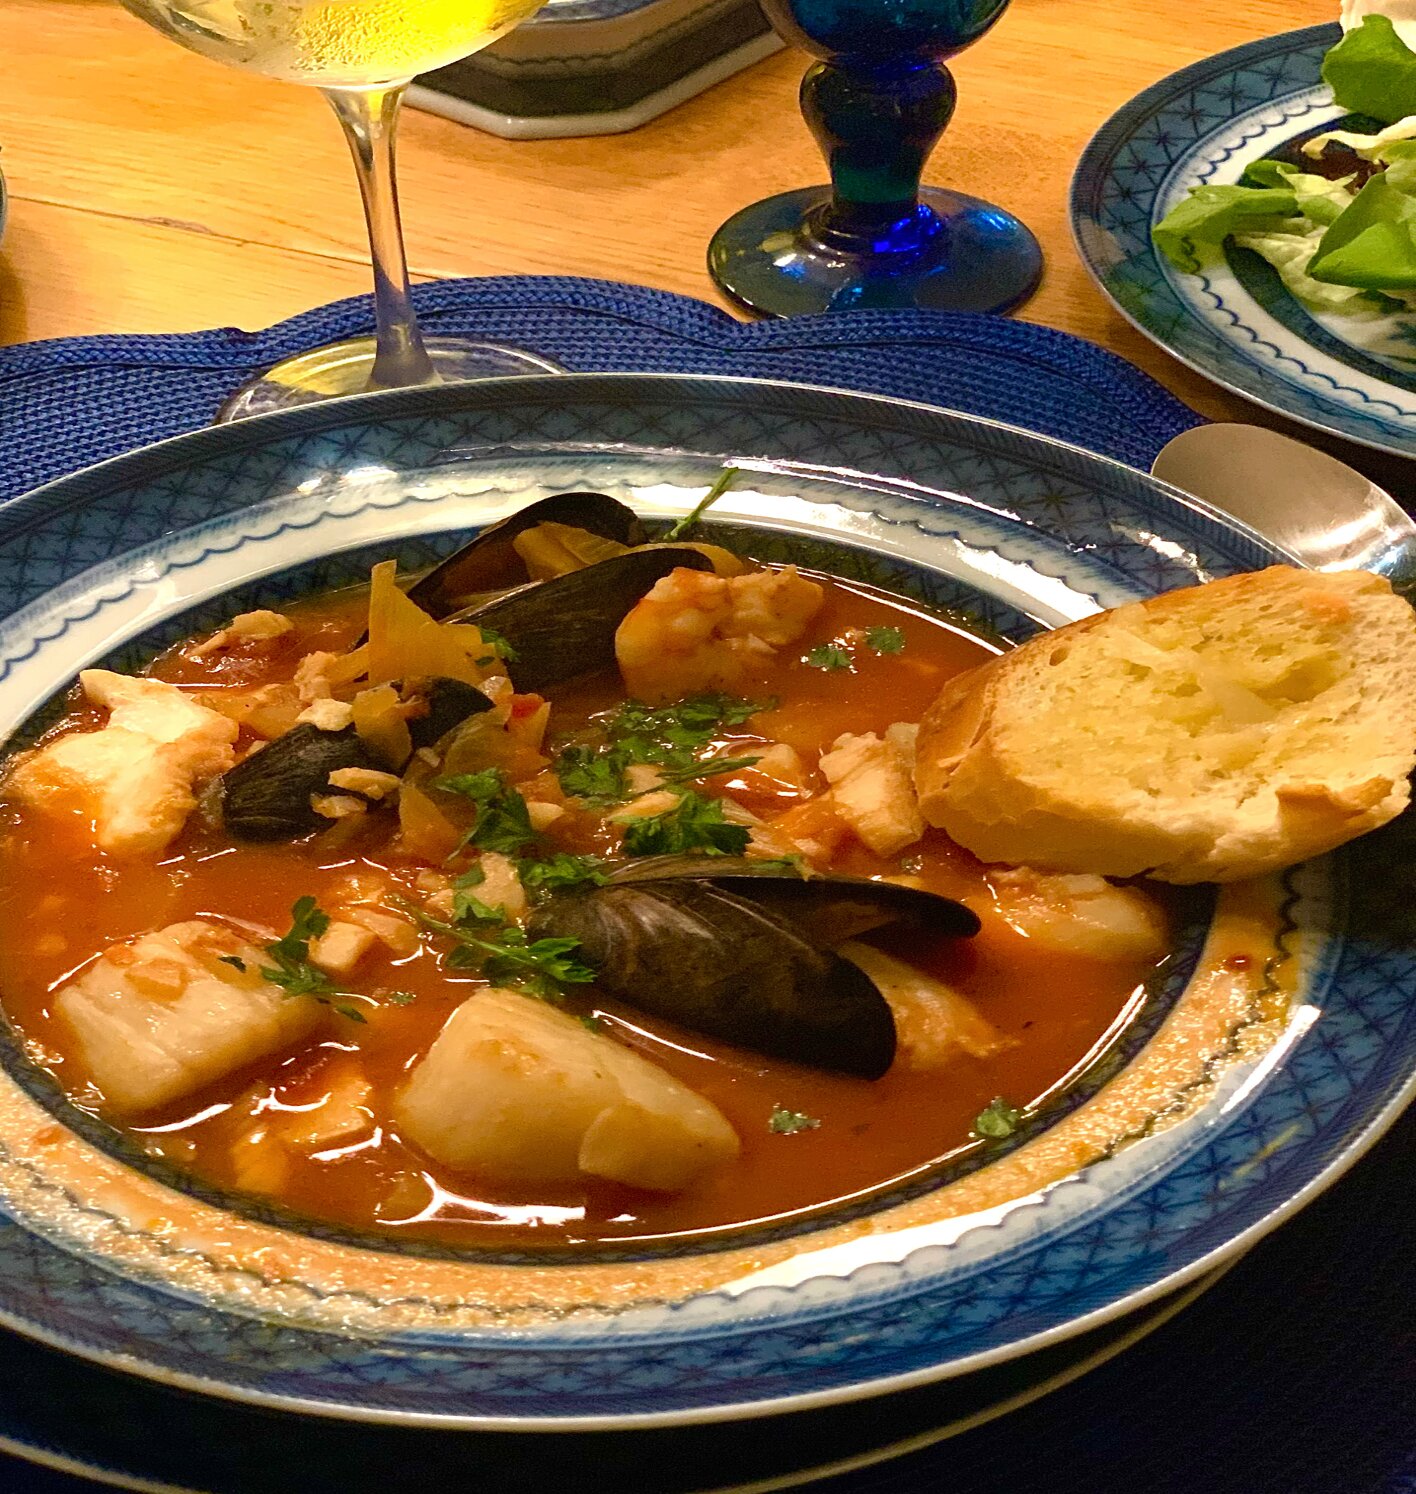 Nantucket home chef Margit Baker’s seafood stew is overflowing with fresh white fish, scallops, shrimp and clams.